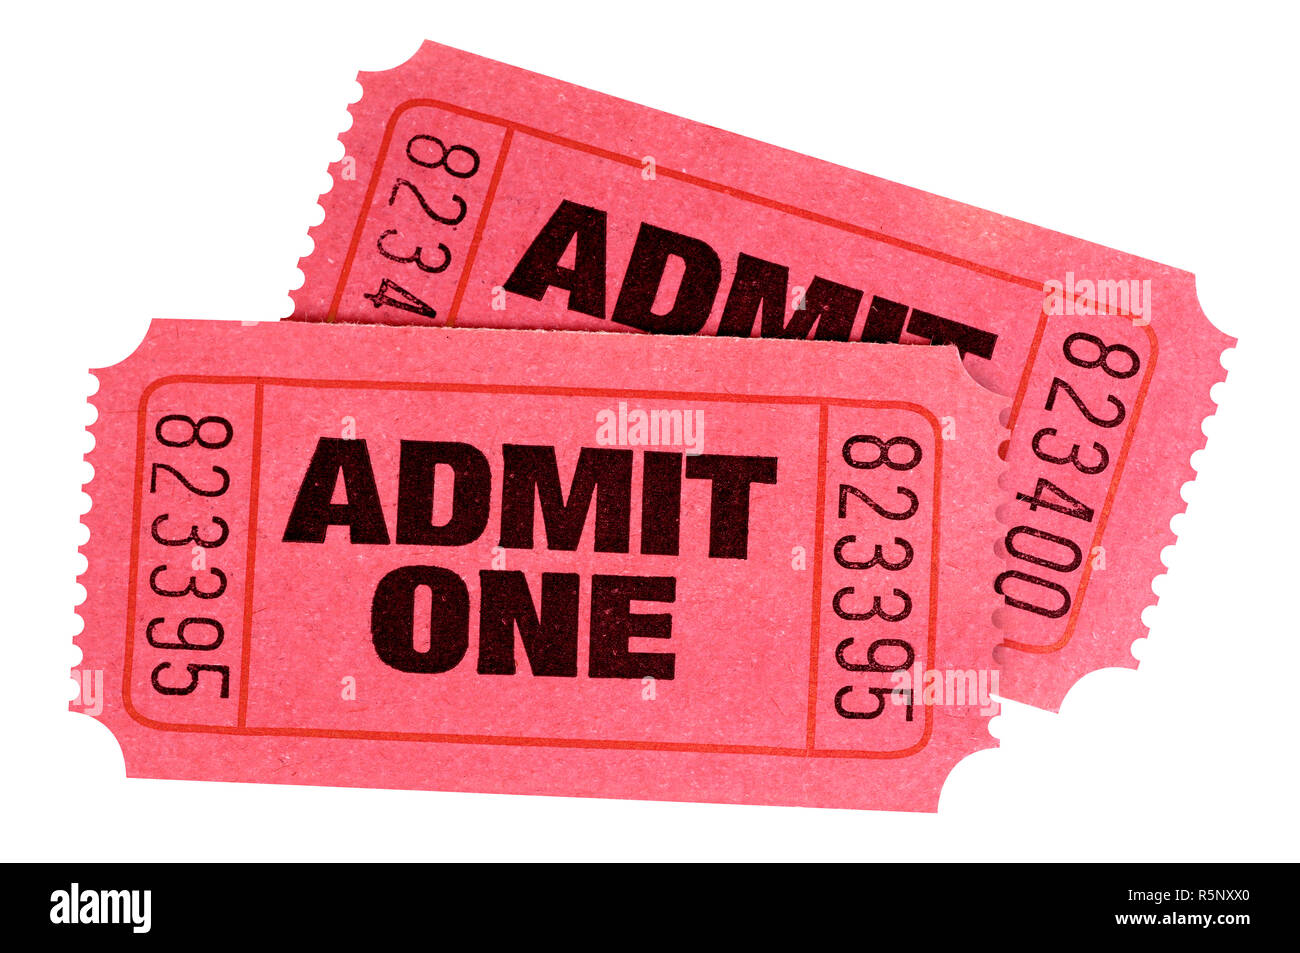 Two red admit one tickets isolated white background. Stock Photo